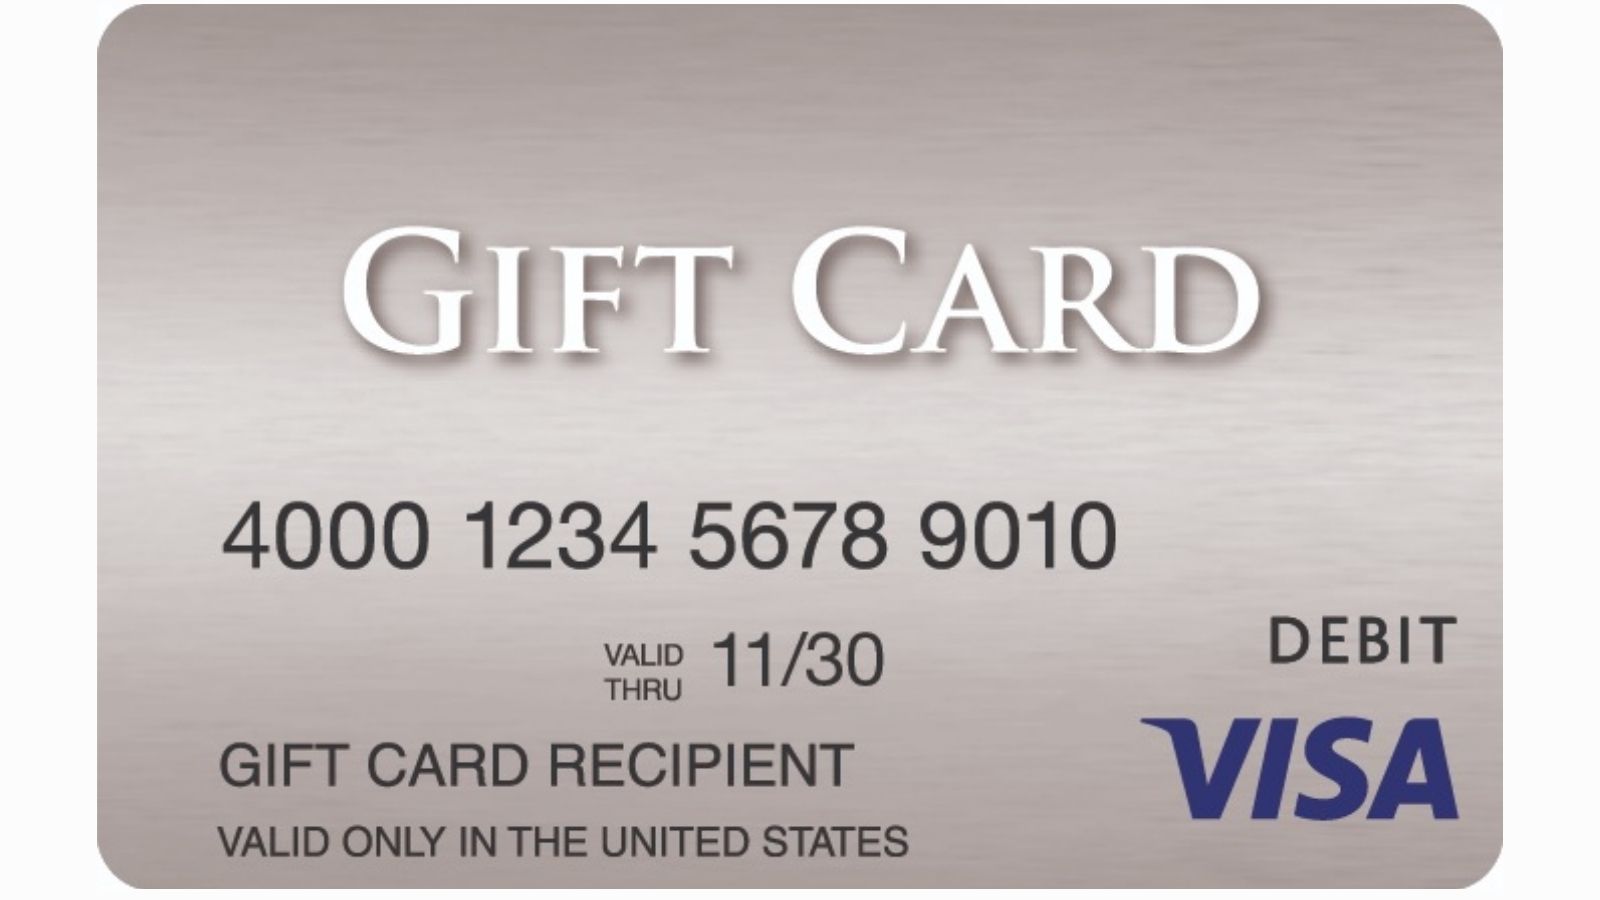 Office Depot/OfficeMax: Buy $300+ Visa Gift Cards & Save $15 (5/22 to 5/28/22)